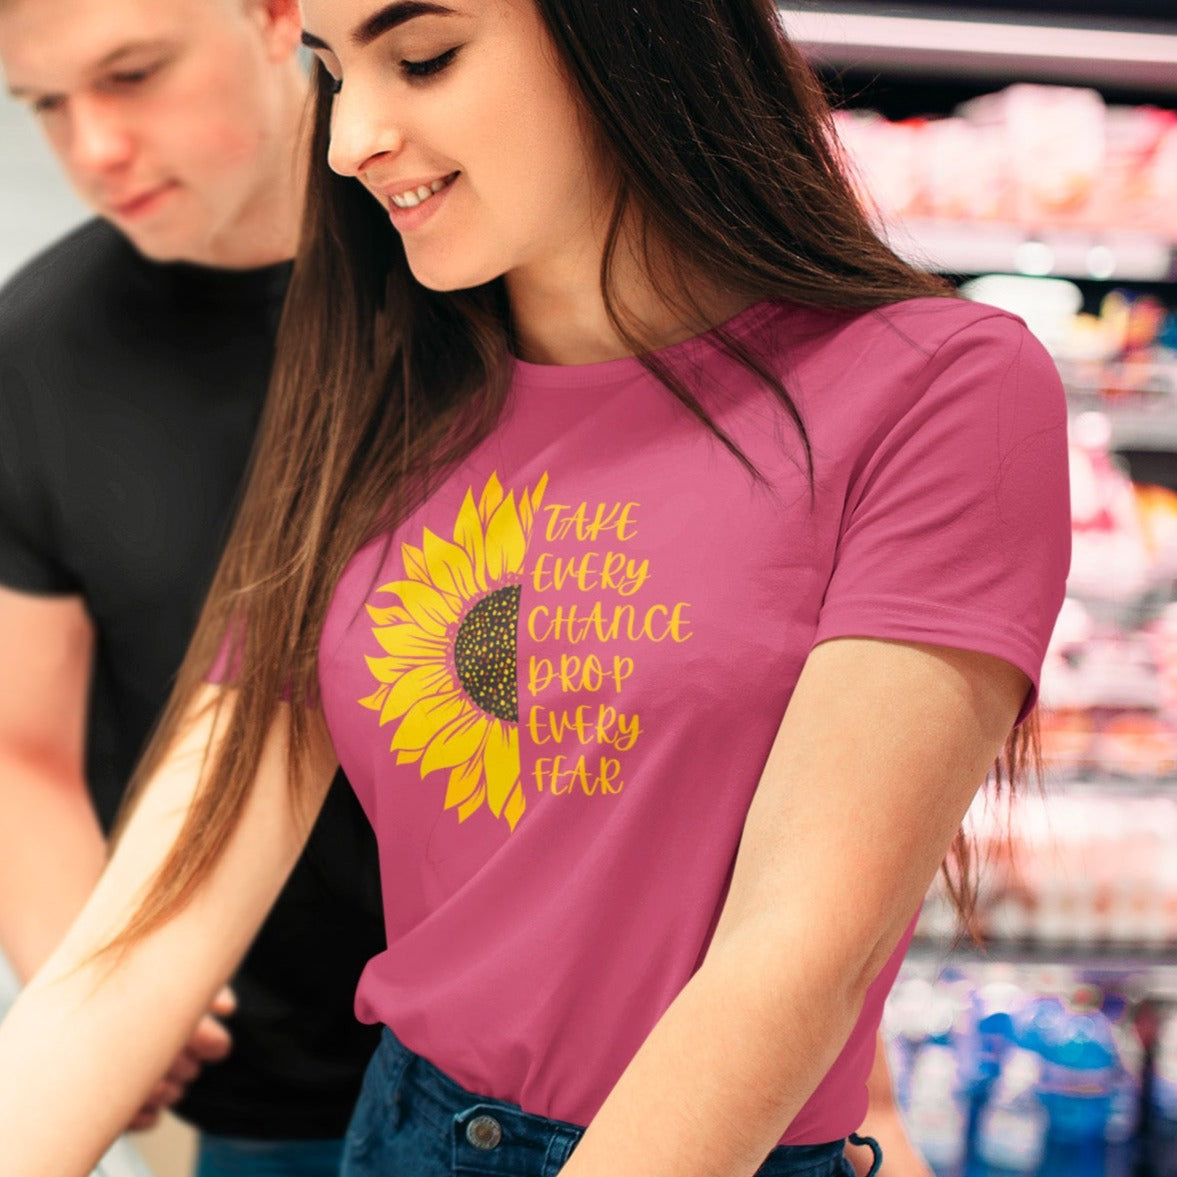 take-every-chance-drop-every-fear-berry-t-shirt-sunflower-of-a-woman-at-the-supermarket-with-her-boyfriend